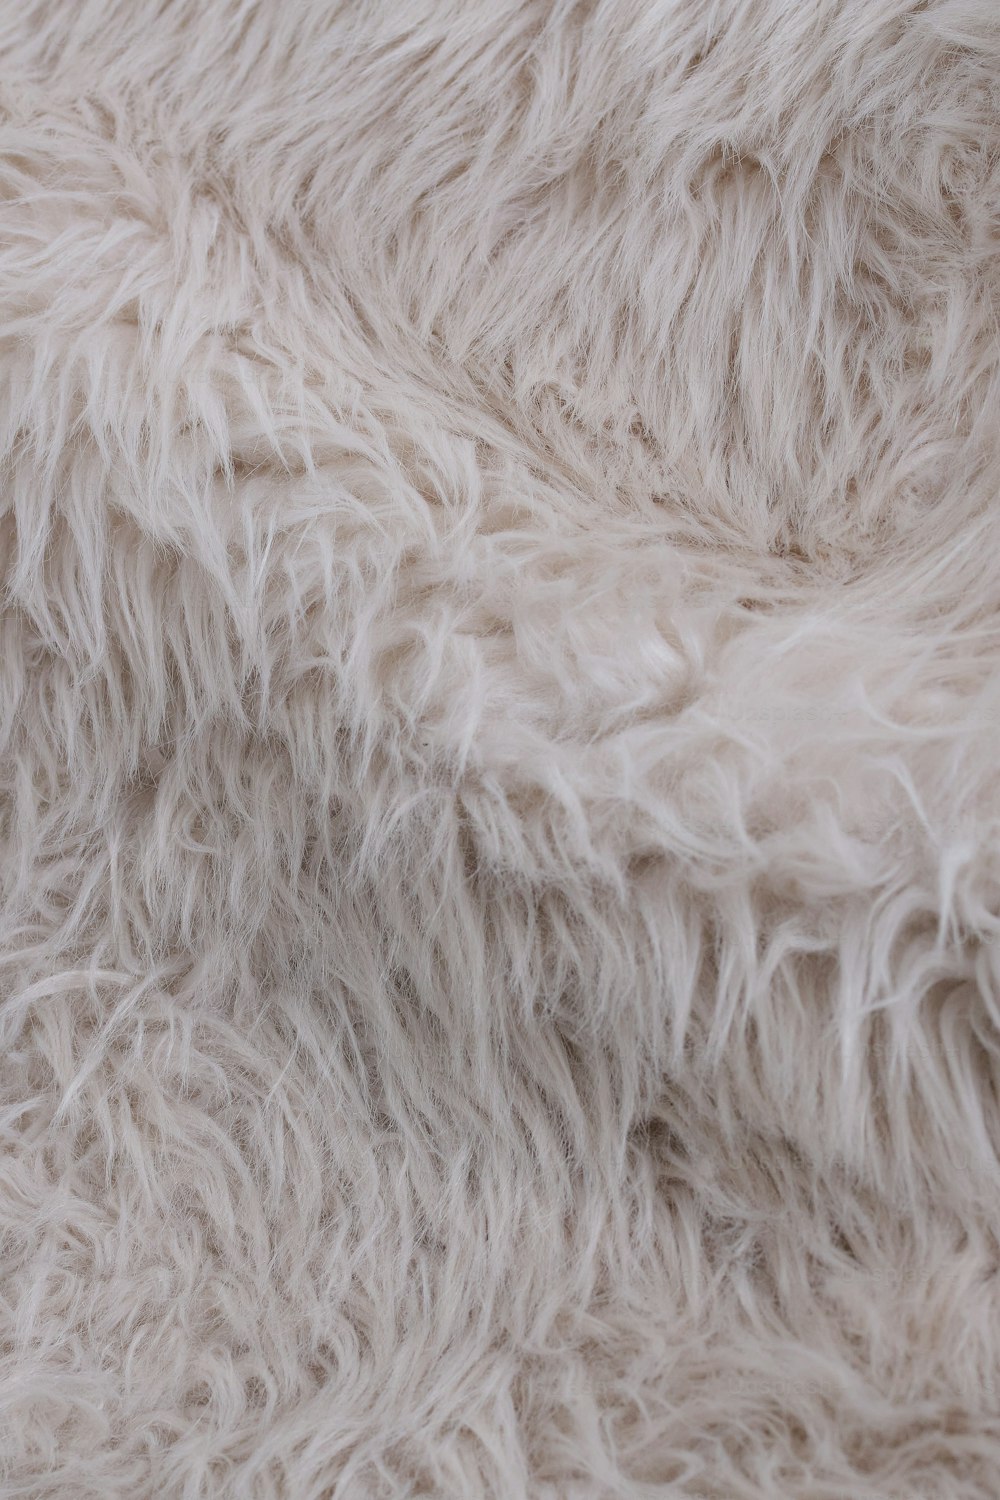 White Fabric Pictures  Download Free Images on Unsplash